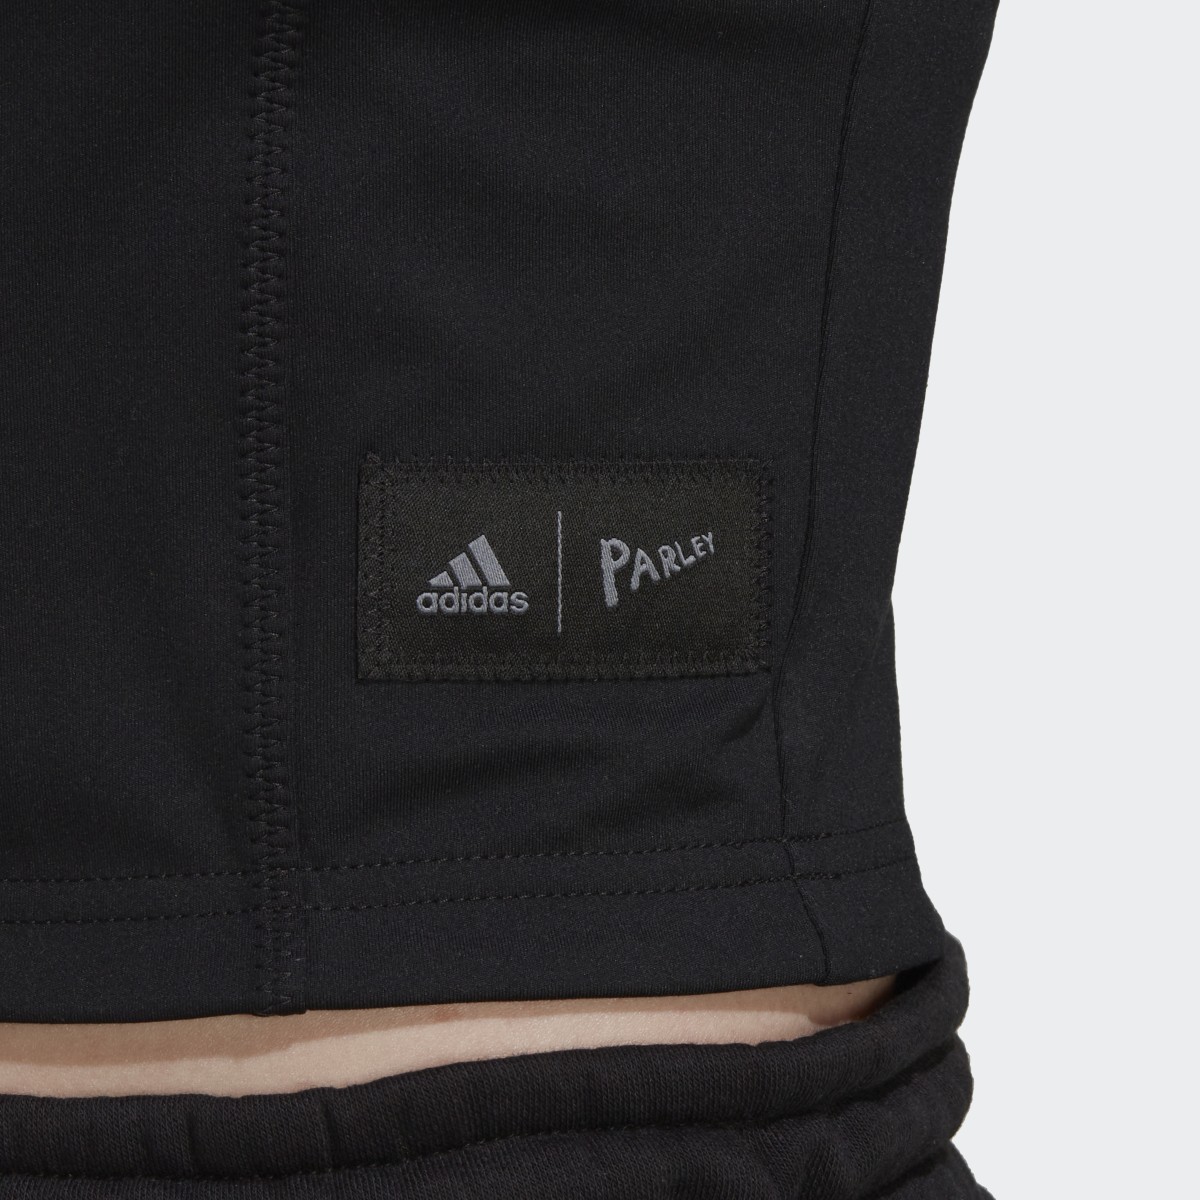 Adidas Parley Run for the Oceans Cropped Tank Top. 6